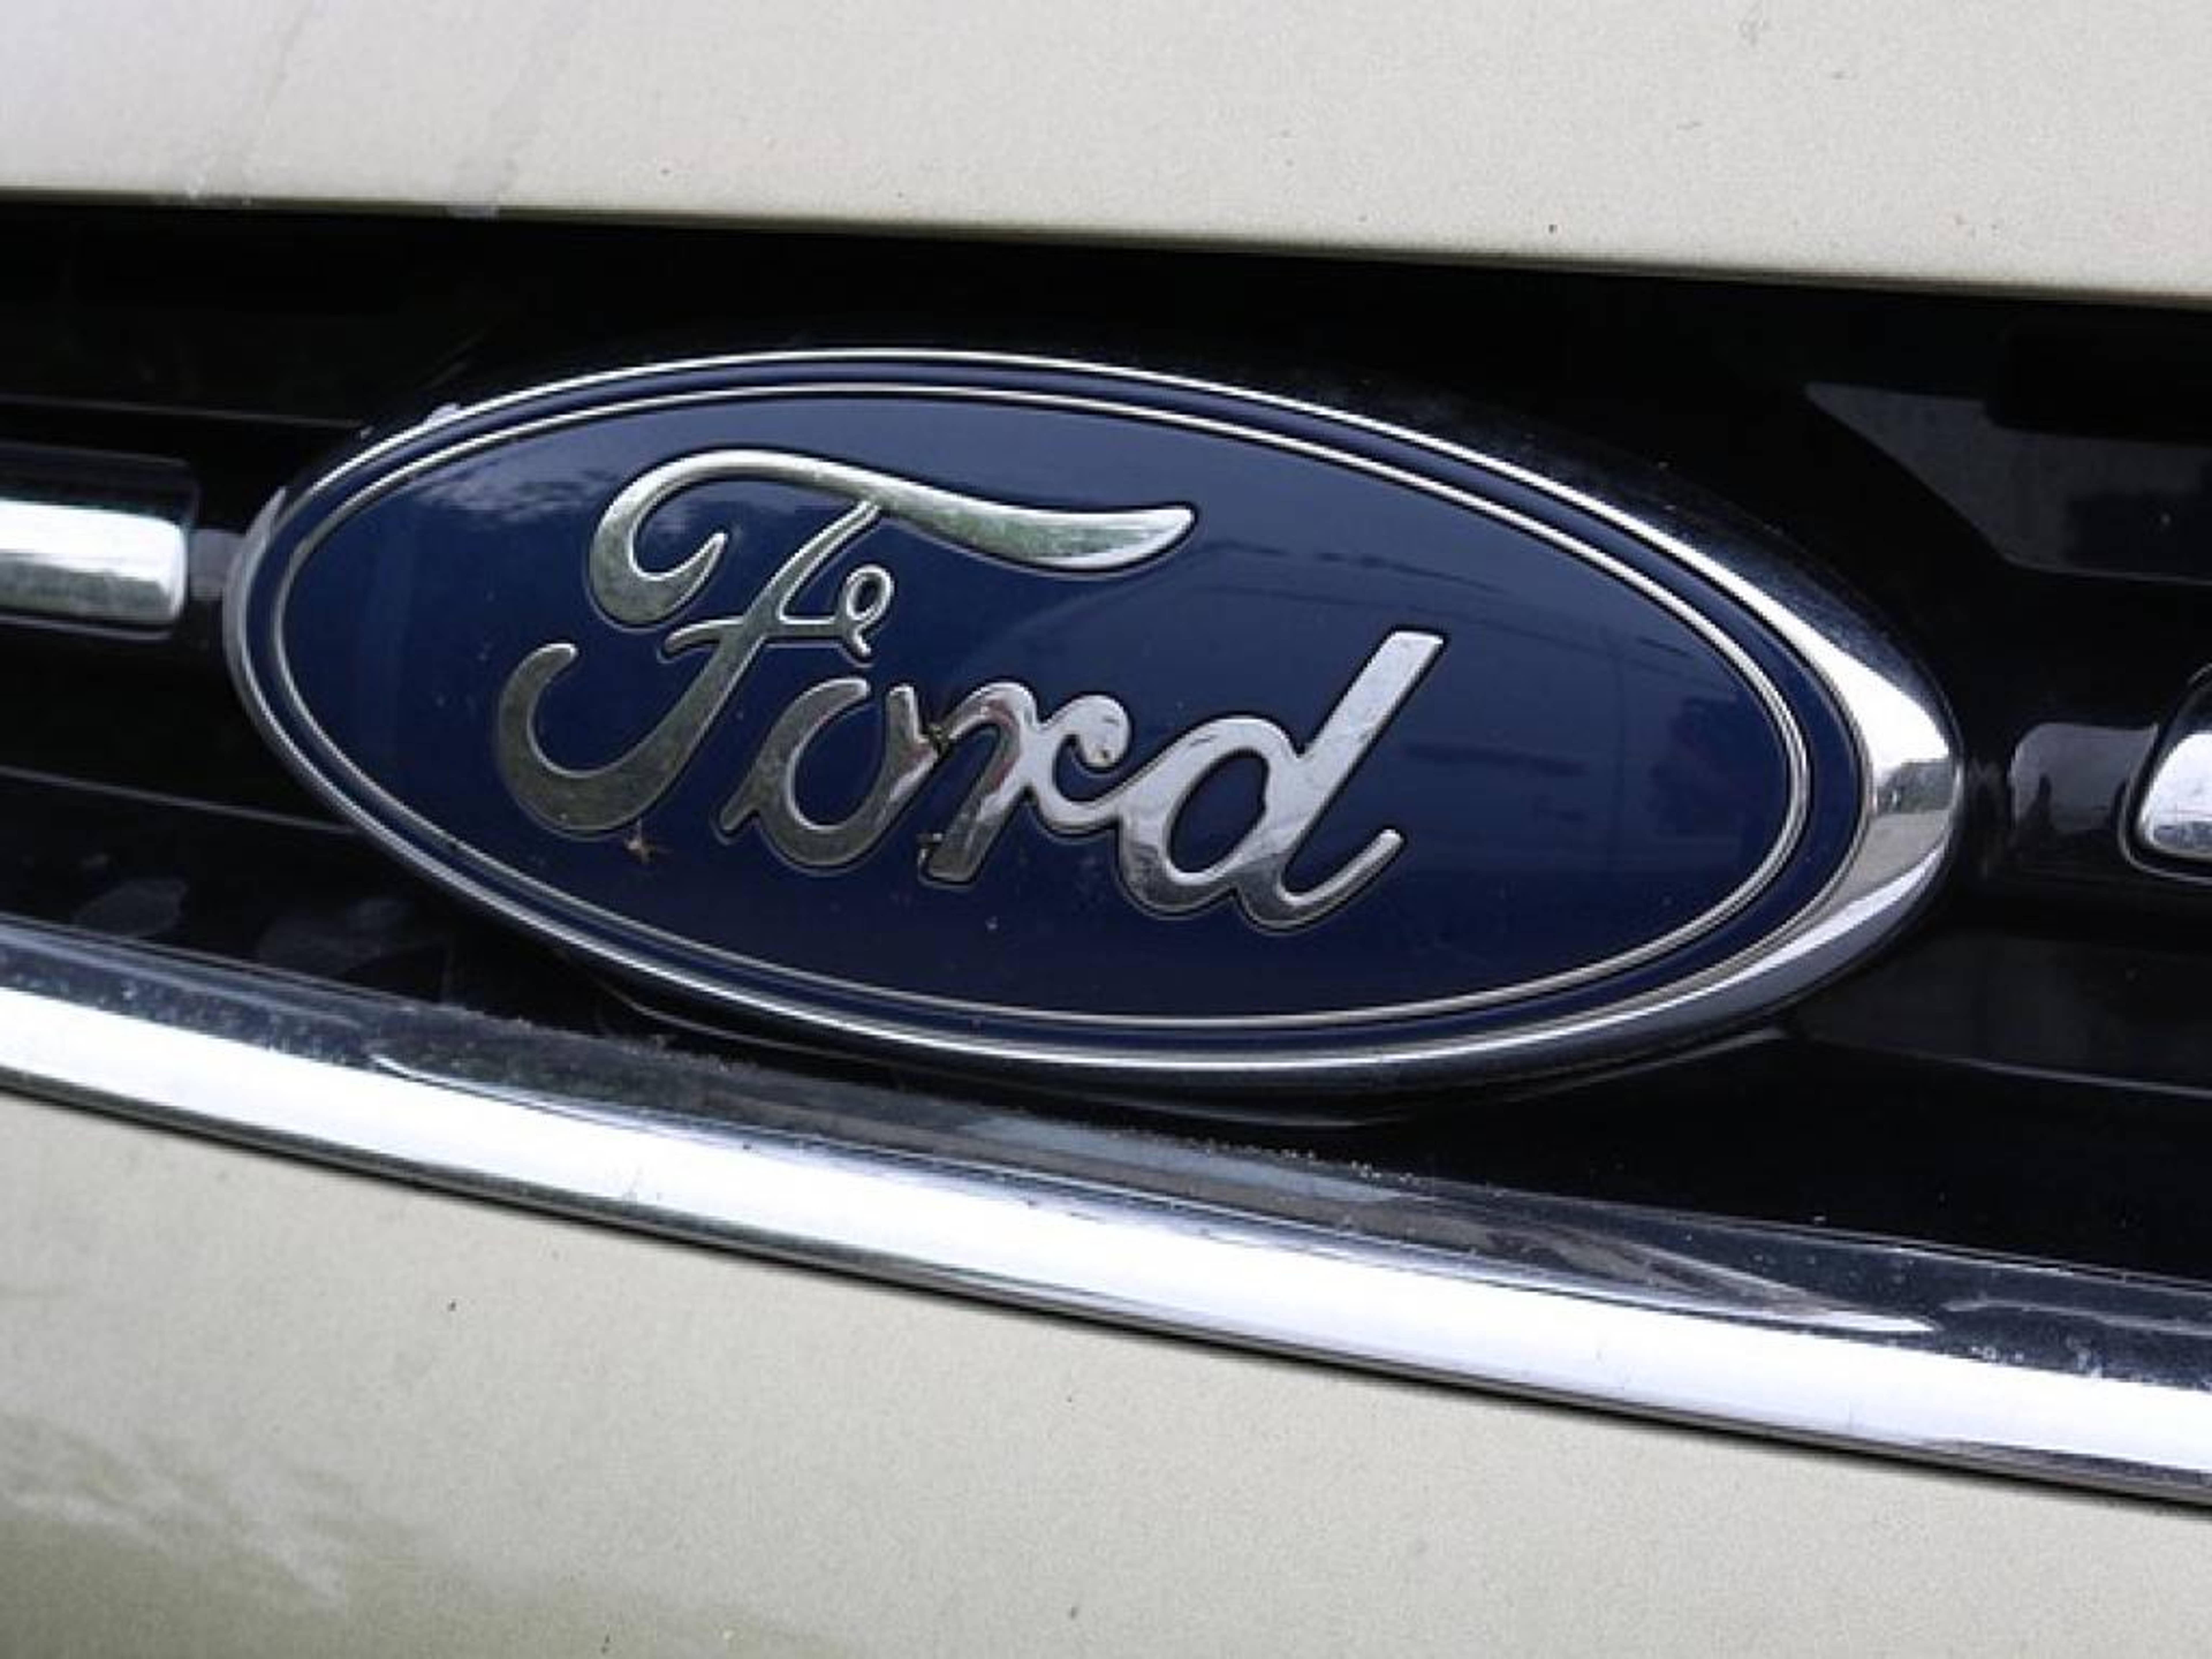 Ford Falls On Q4 Earnings Miss, Lower Outlook; Notes Execution Problems Around Explorer